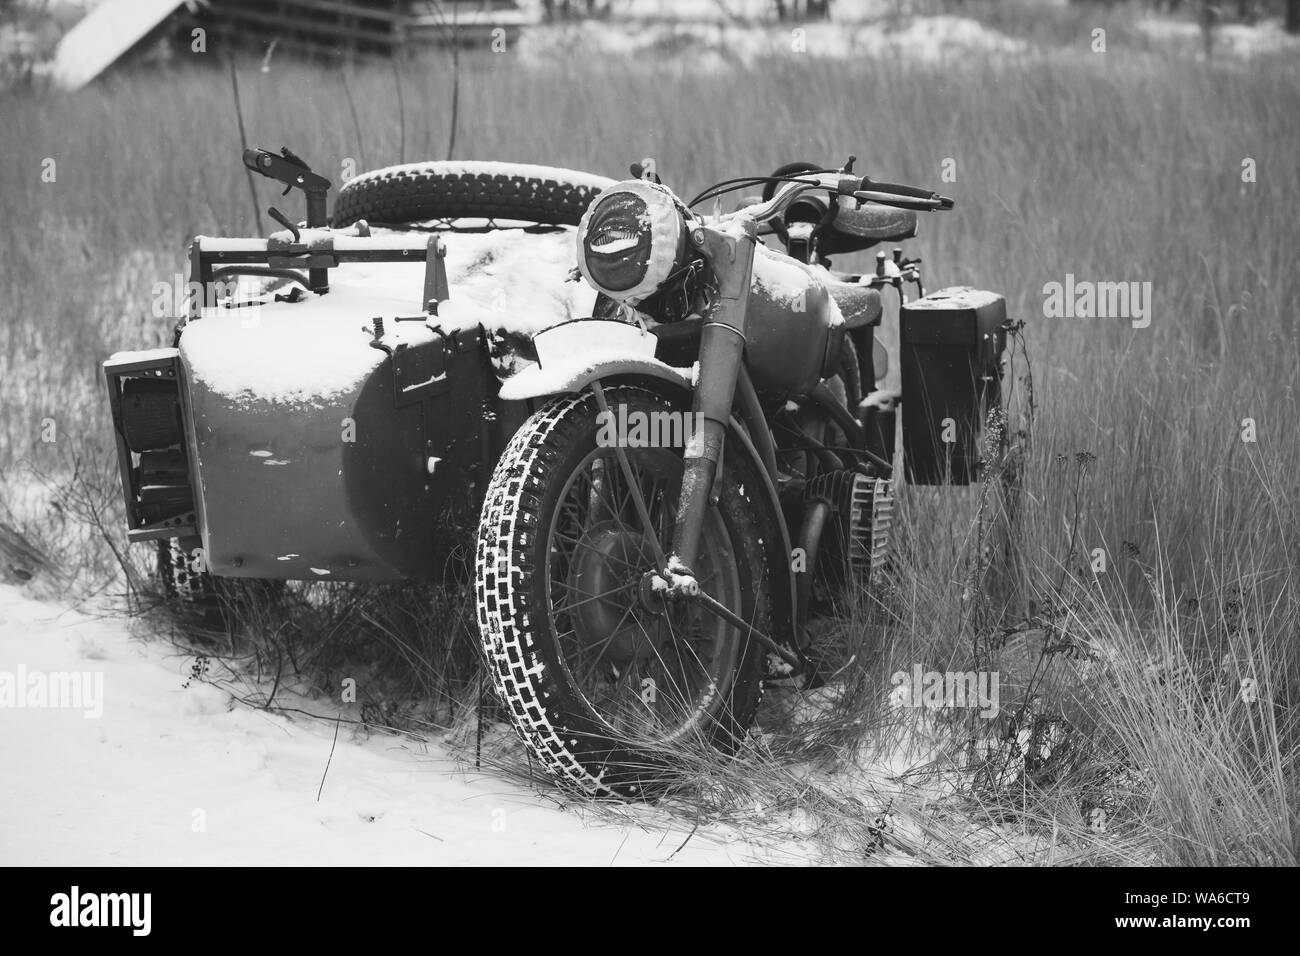 Old Tricar, Three-Wheeled Motorbike Of Wehrmacht, Armed Forces Of Germany Of World War II Time In Winter Forest. Photo In Black And White Colors. Stock Photo